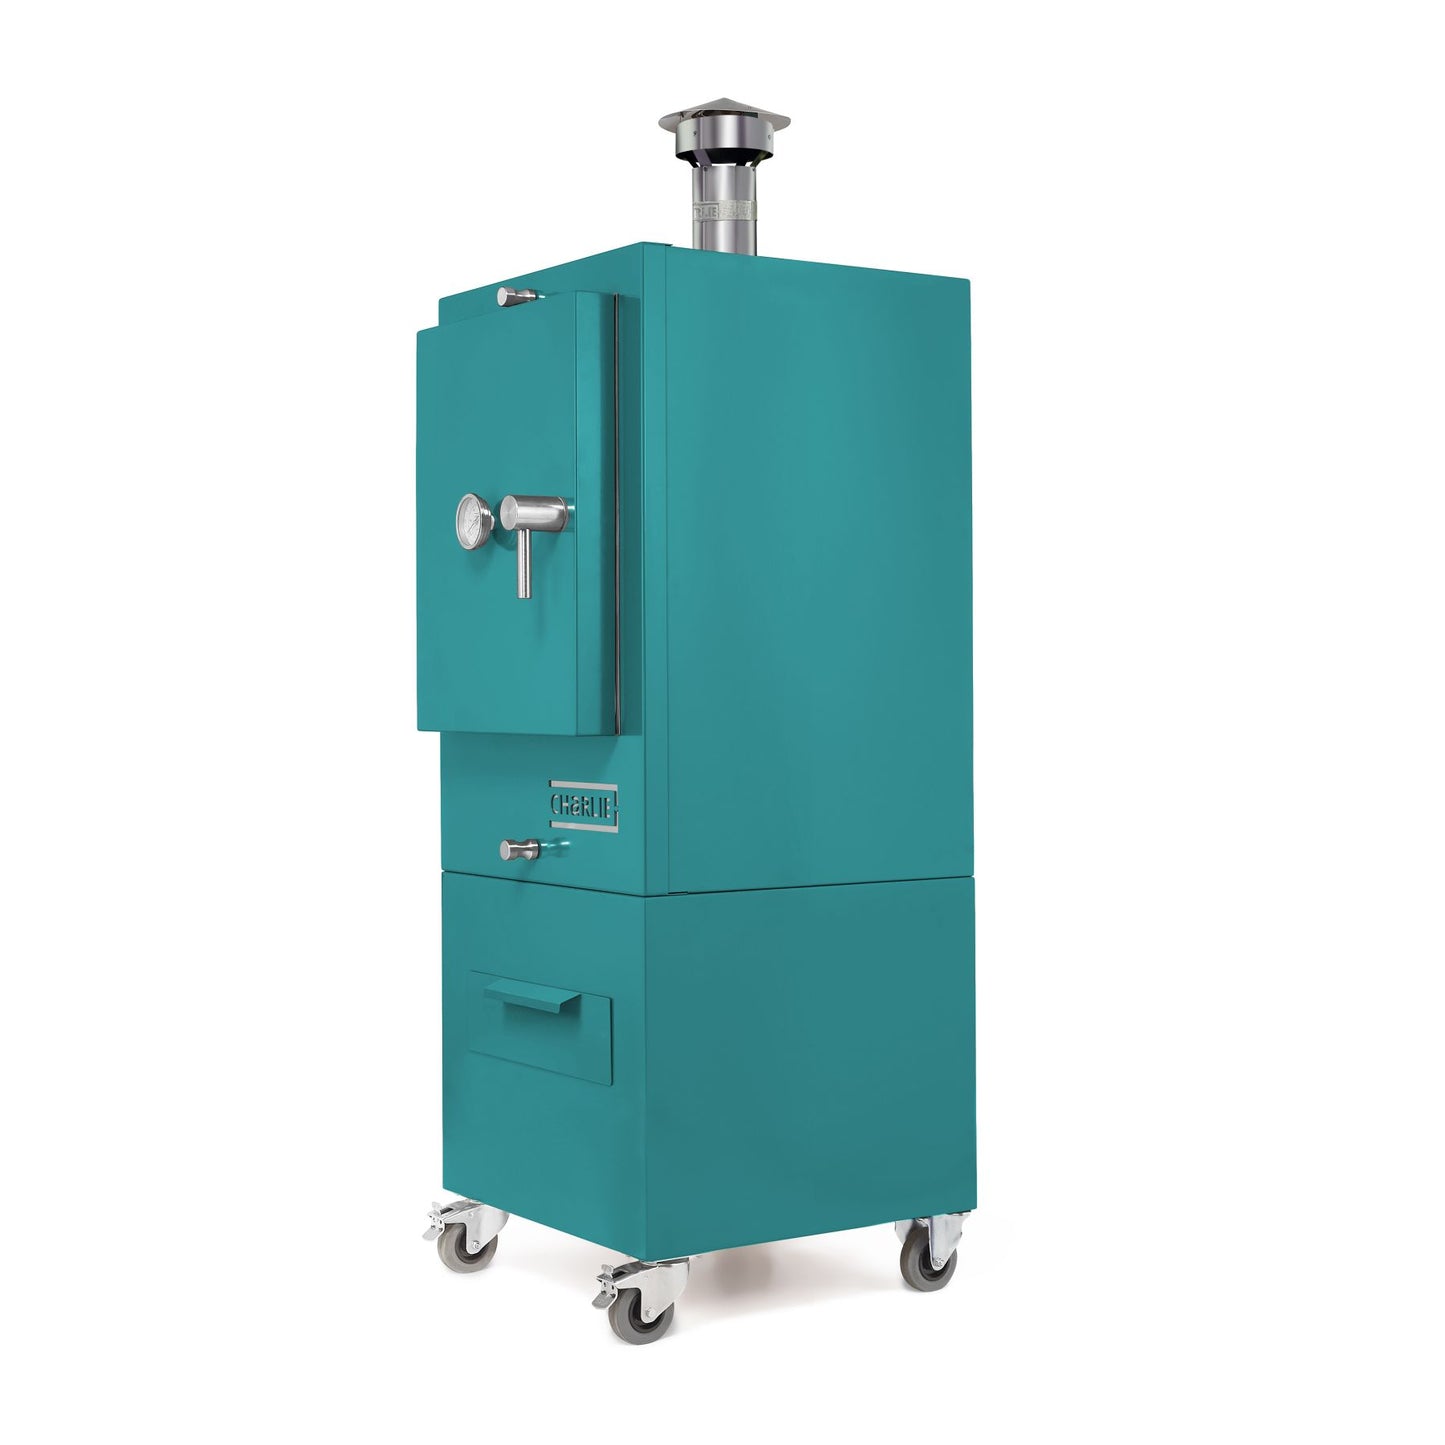 Charlie Charcoal Oven - Teal Duck